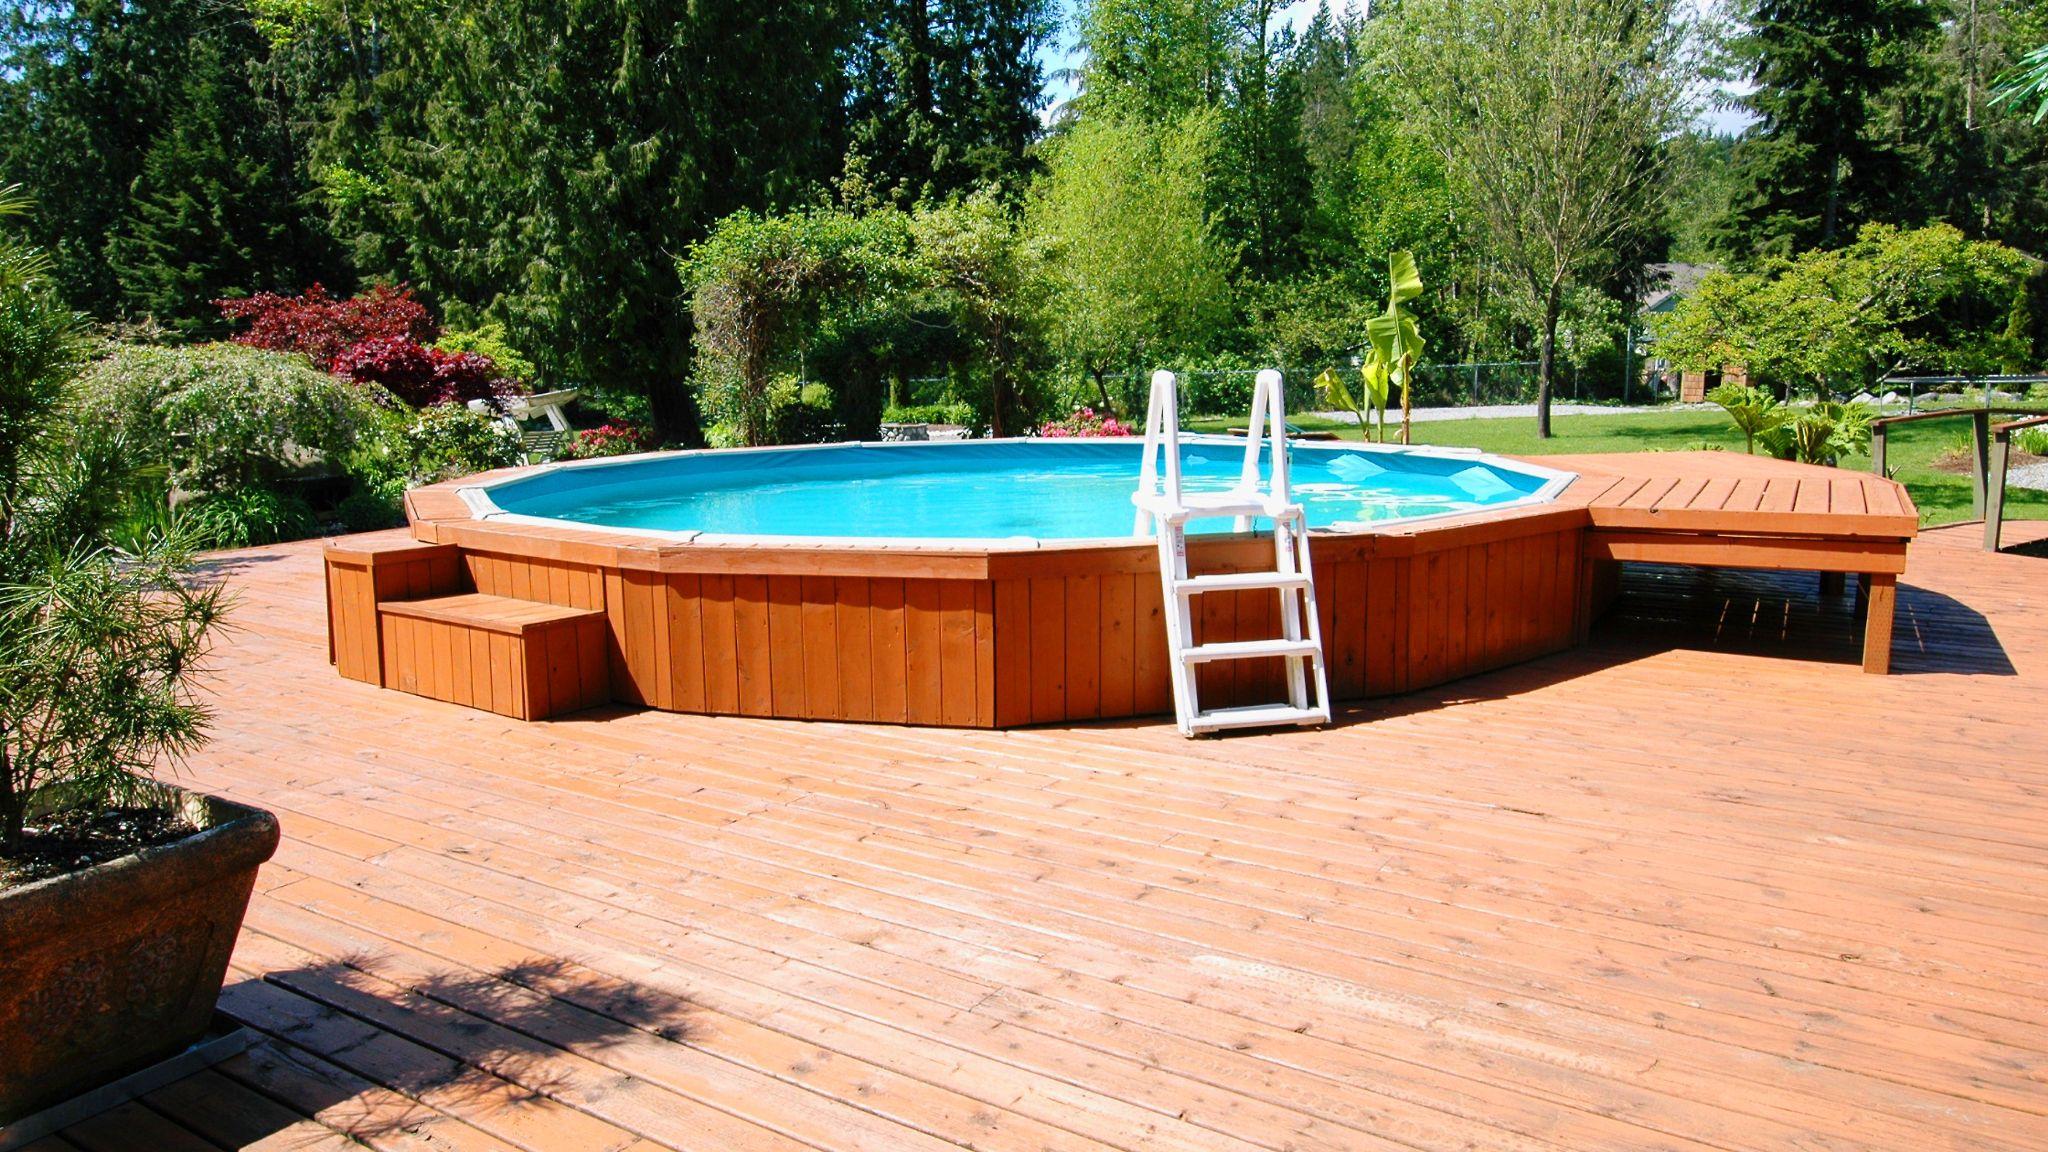 How to Get A Permit for An Above Ground Pool?